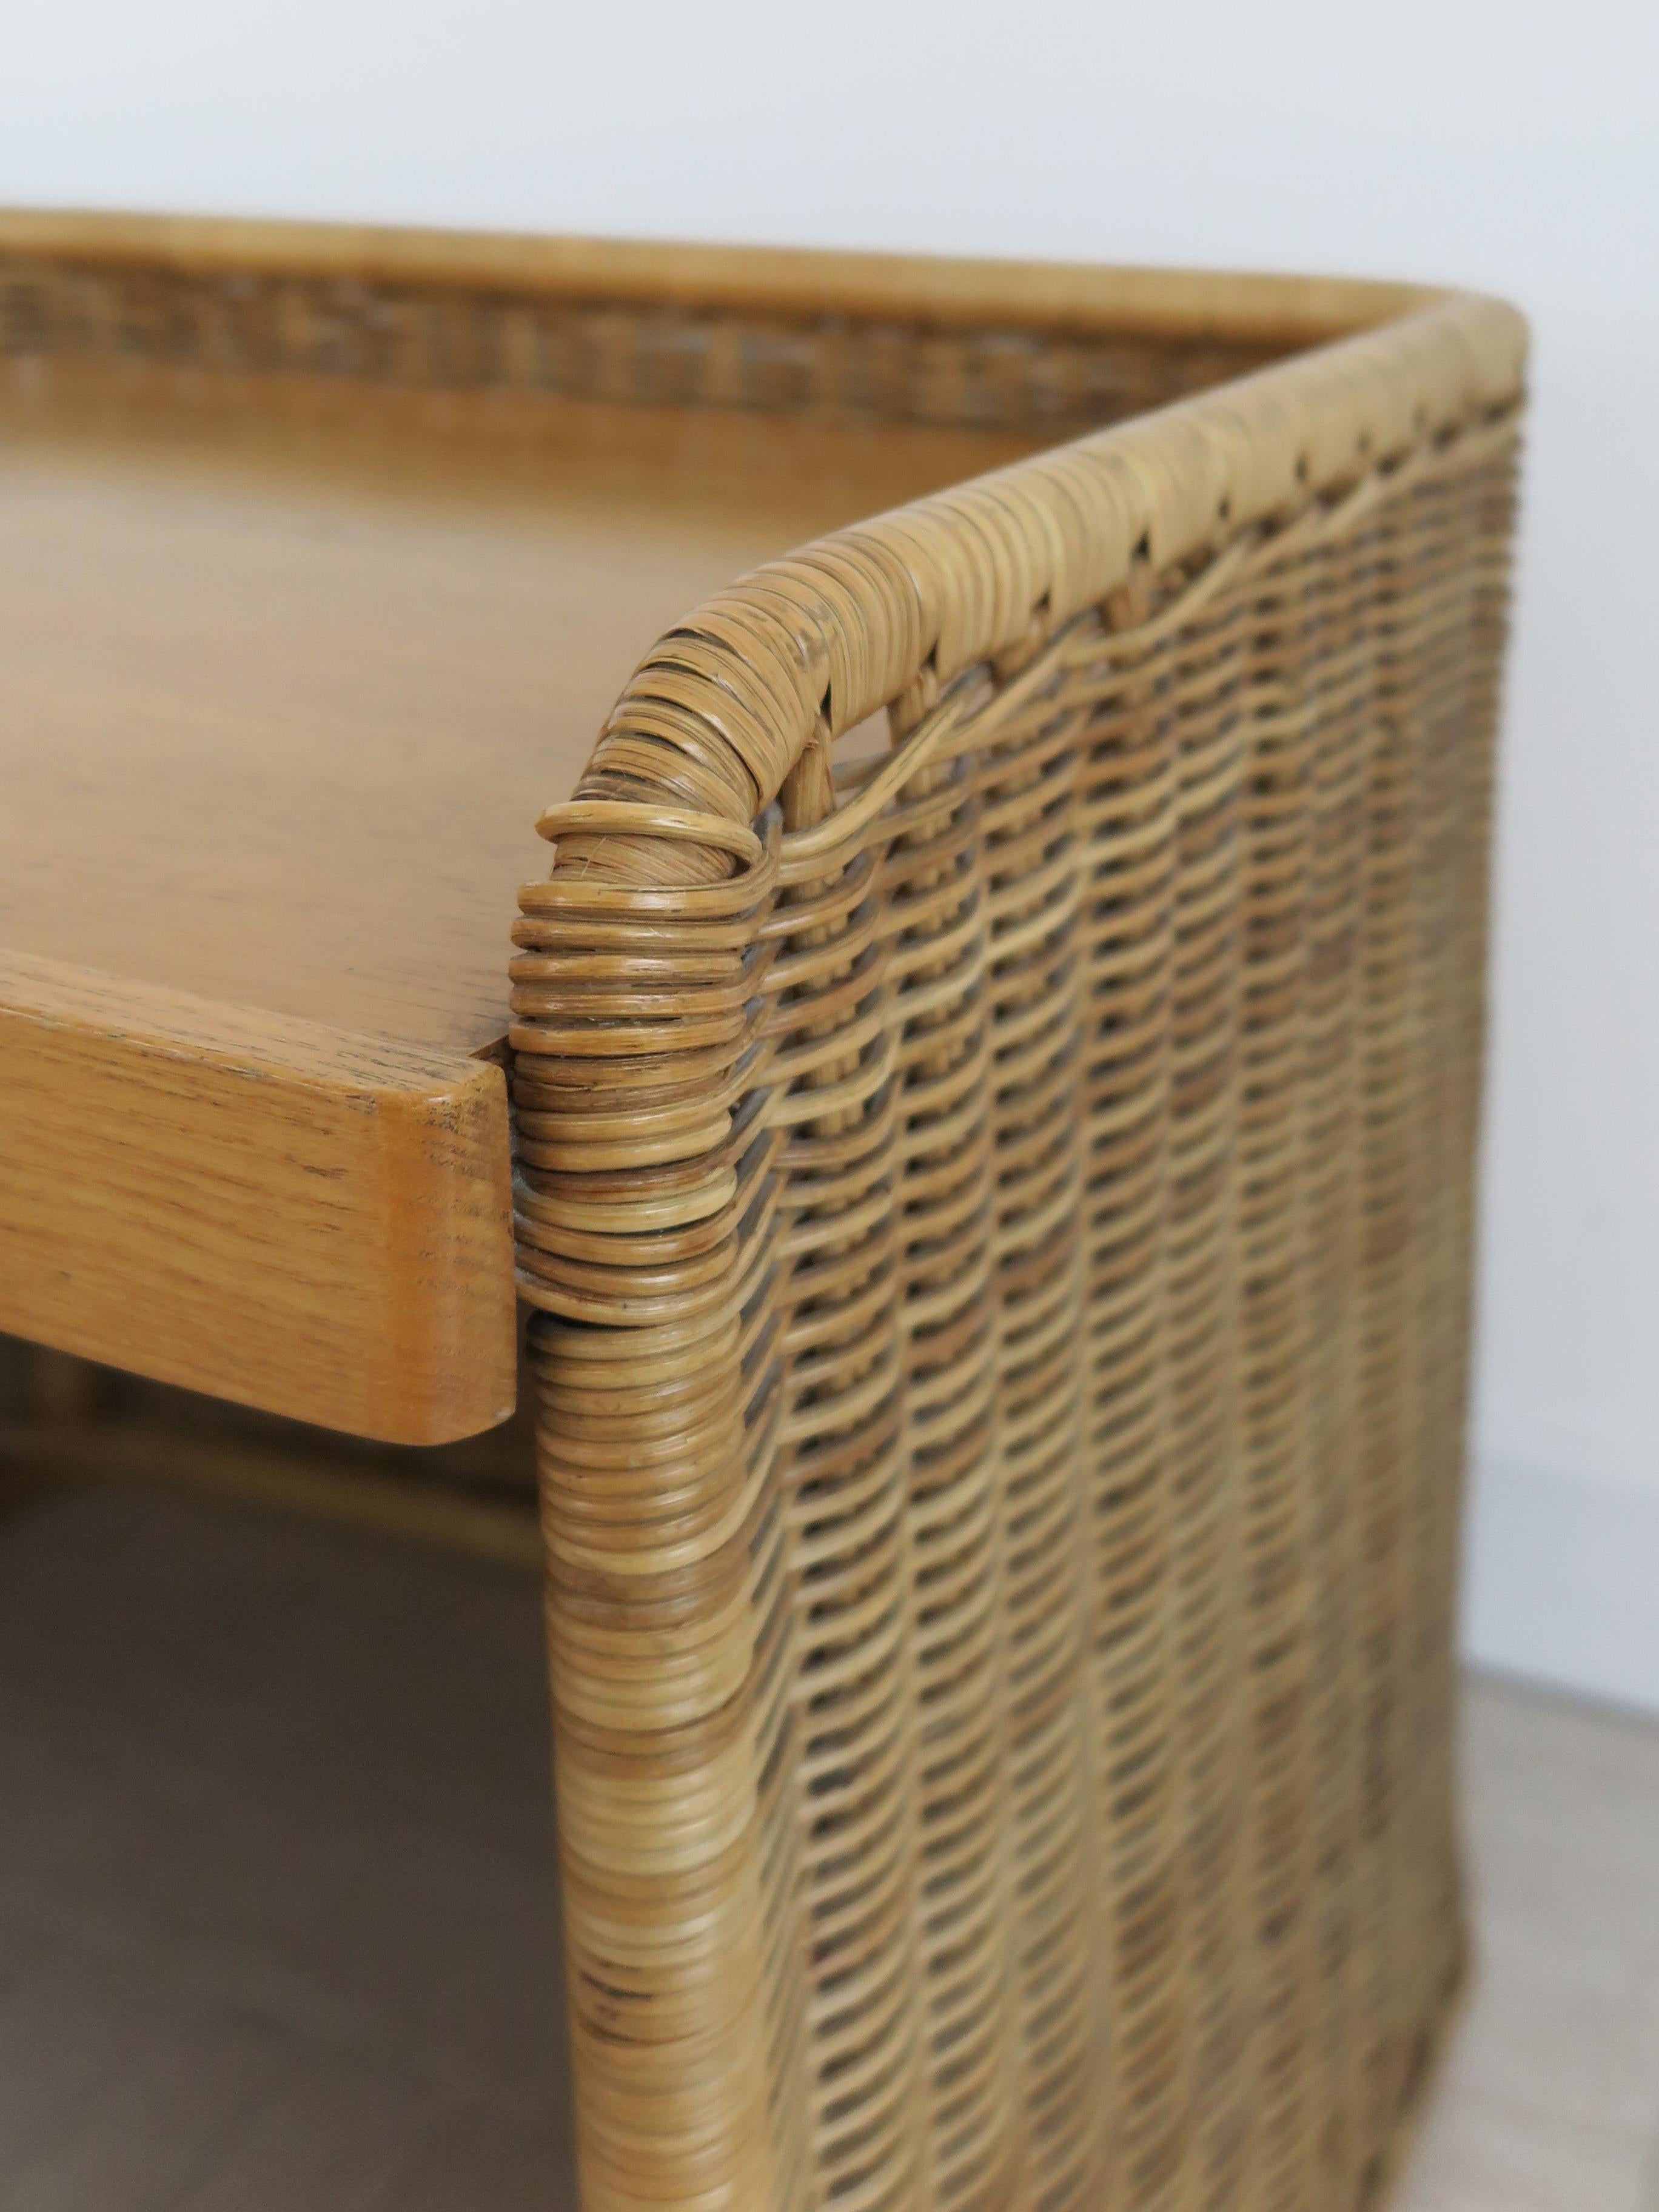 Italian Midcentury Rattan Bamboo Bedside Tables Night Stands, 1950s For Sale 3